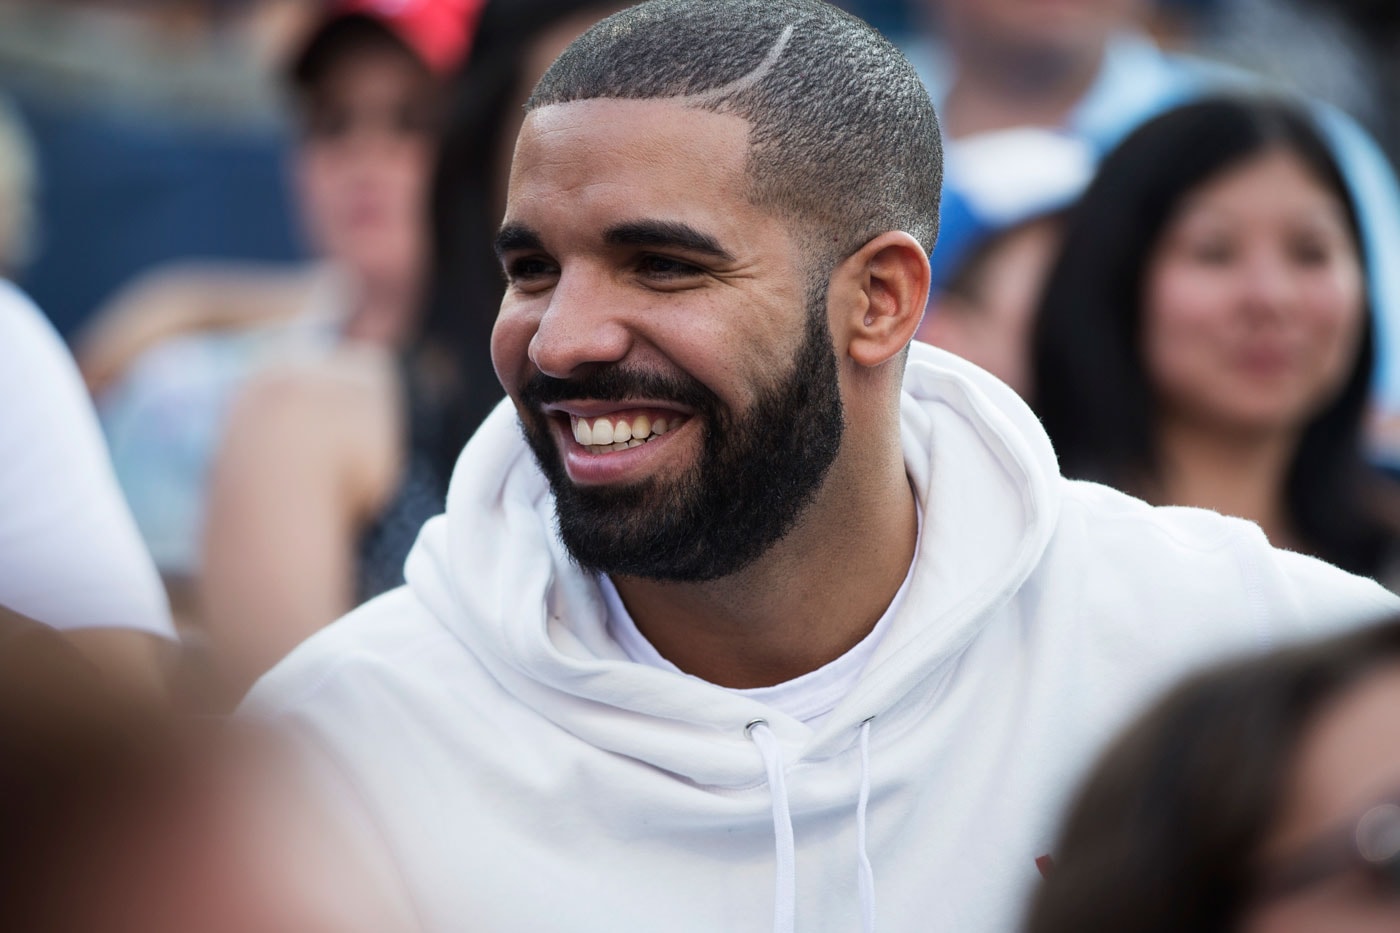 Drake & Future's 'What a Time To Be Alive' Debuts at No. 1 on Billboard 200 Chart